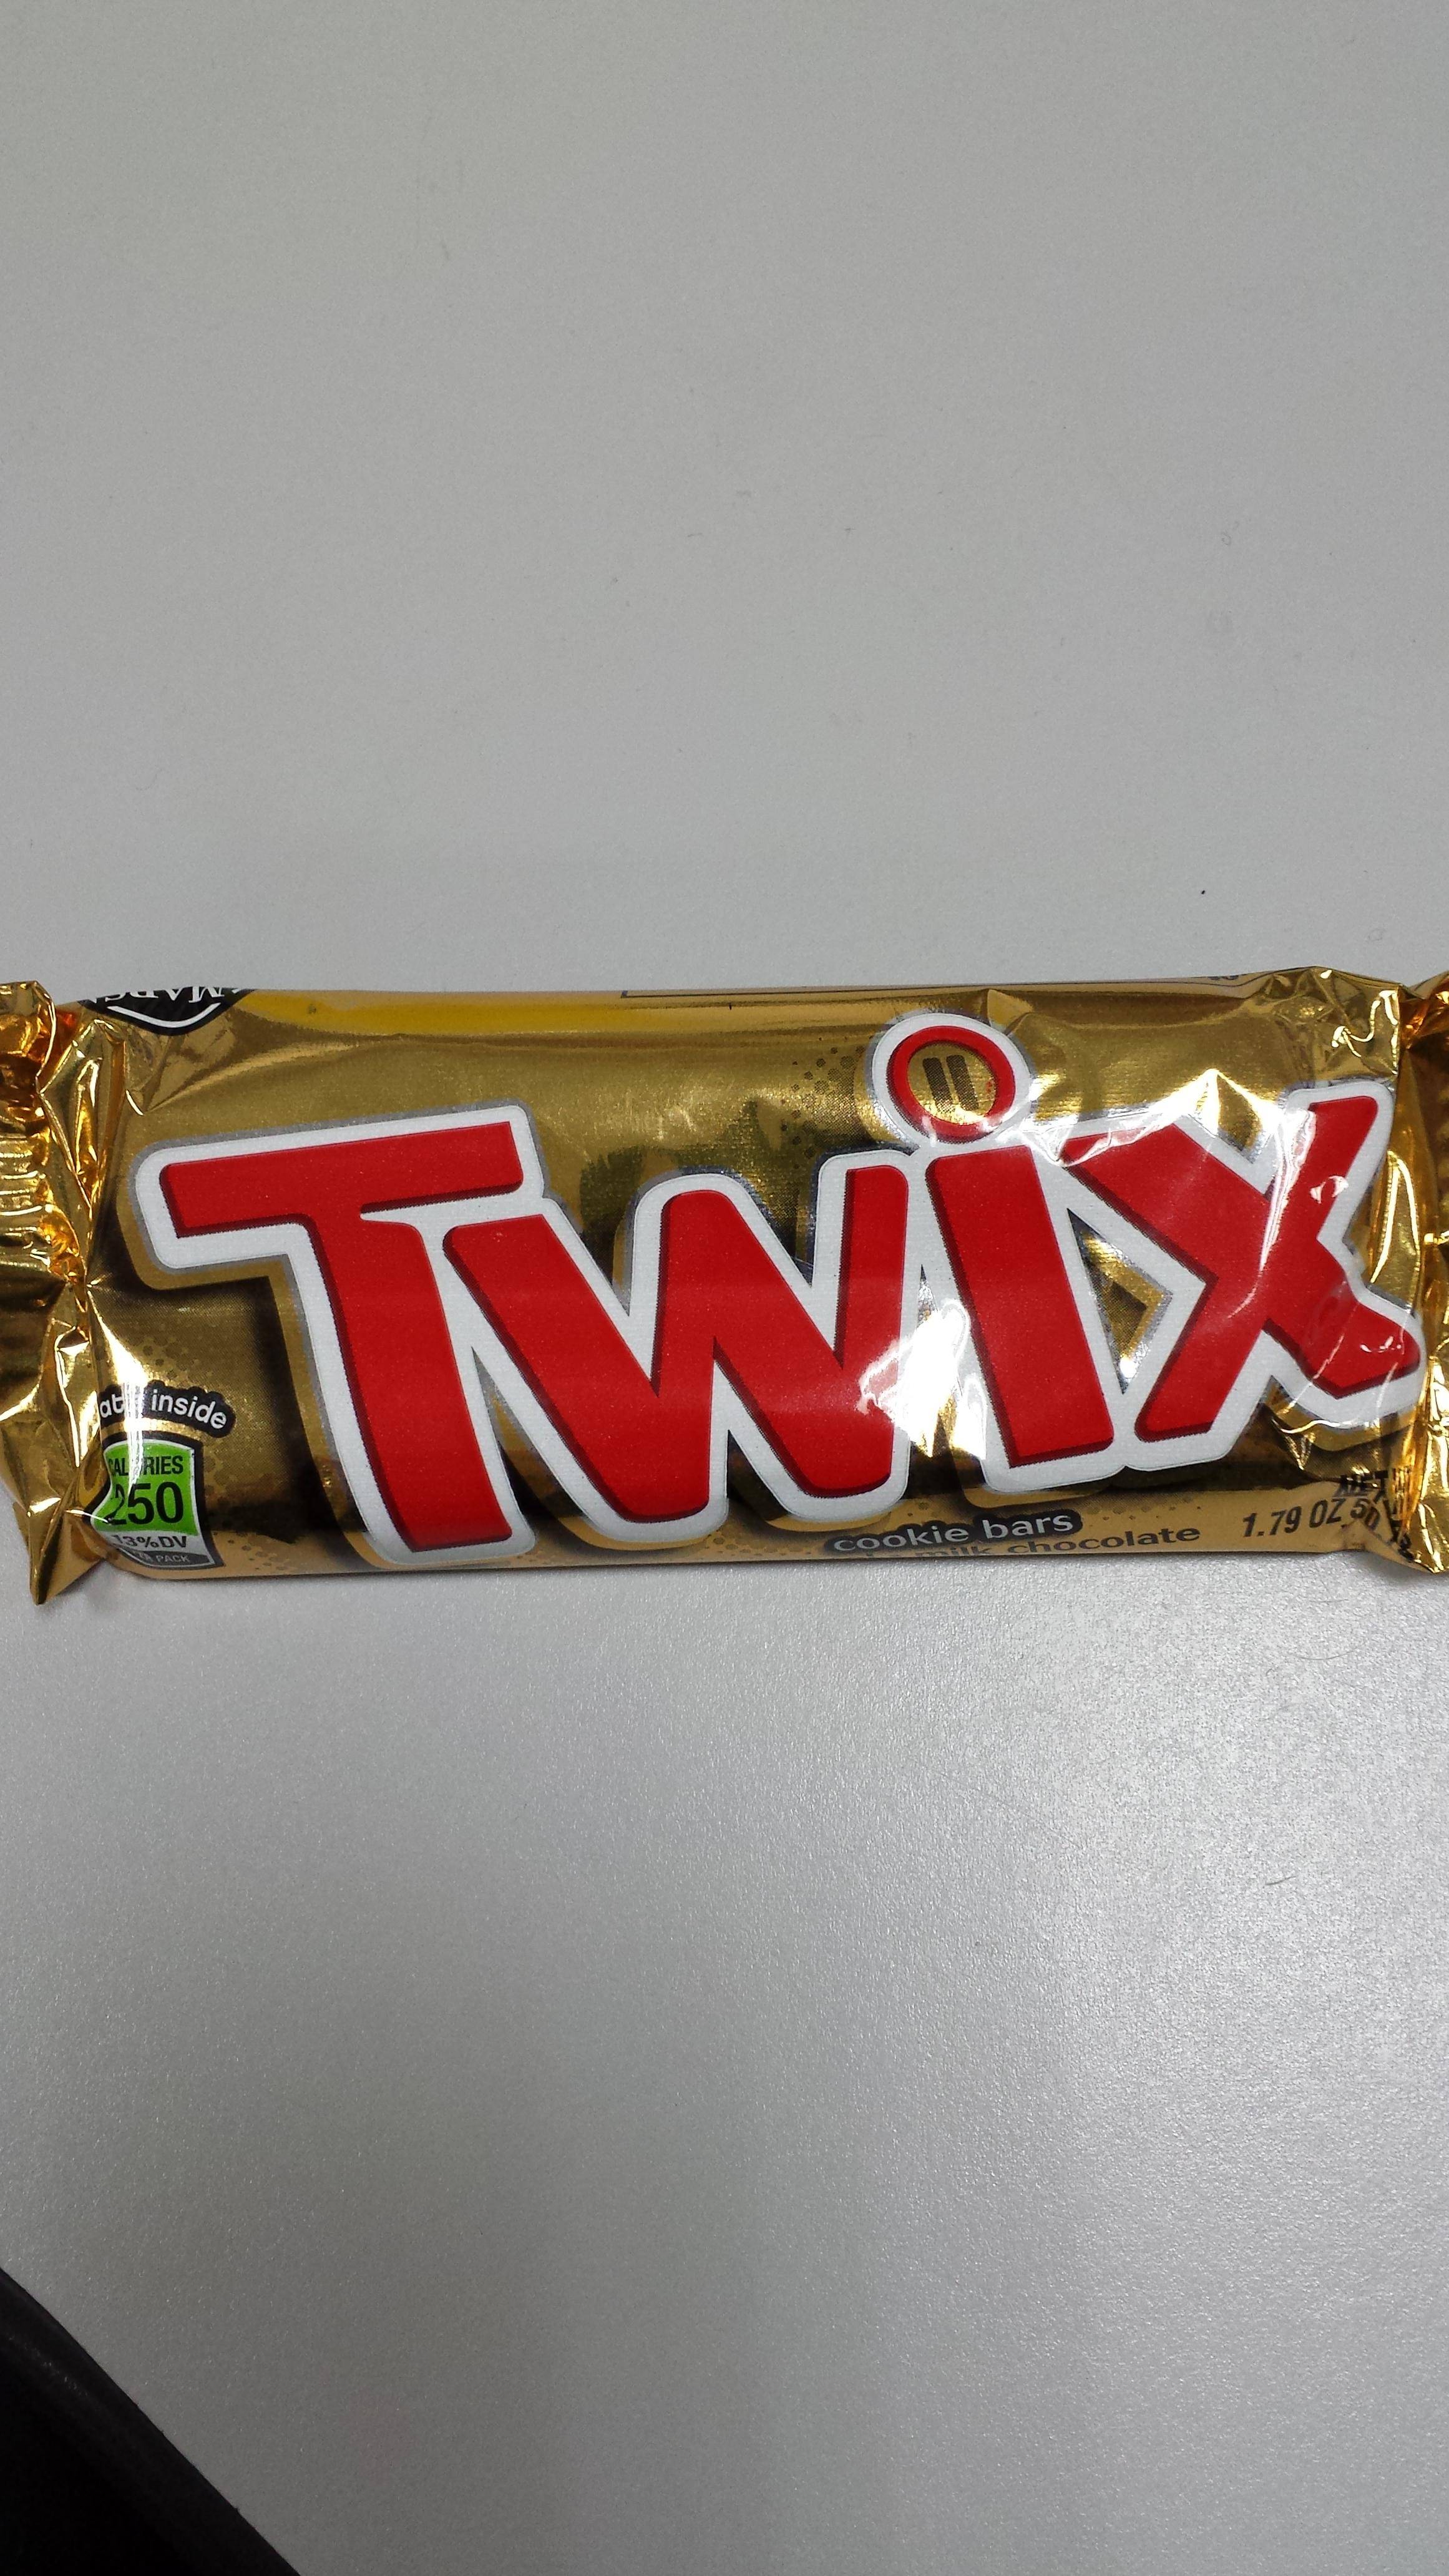 Twix Logo - The dot over the 